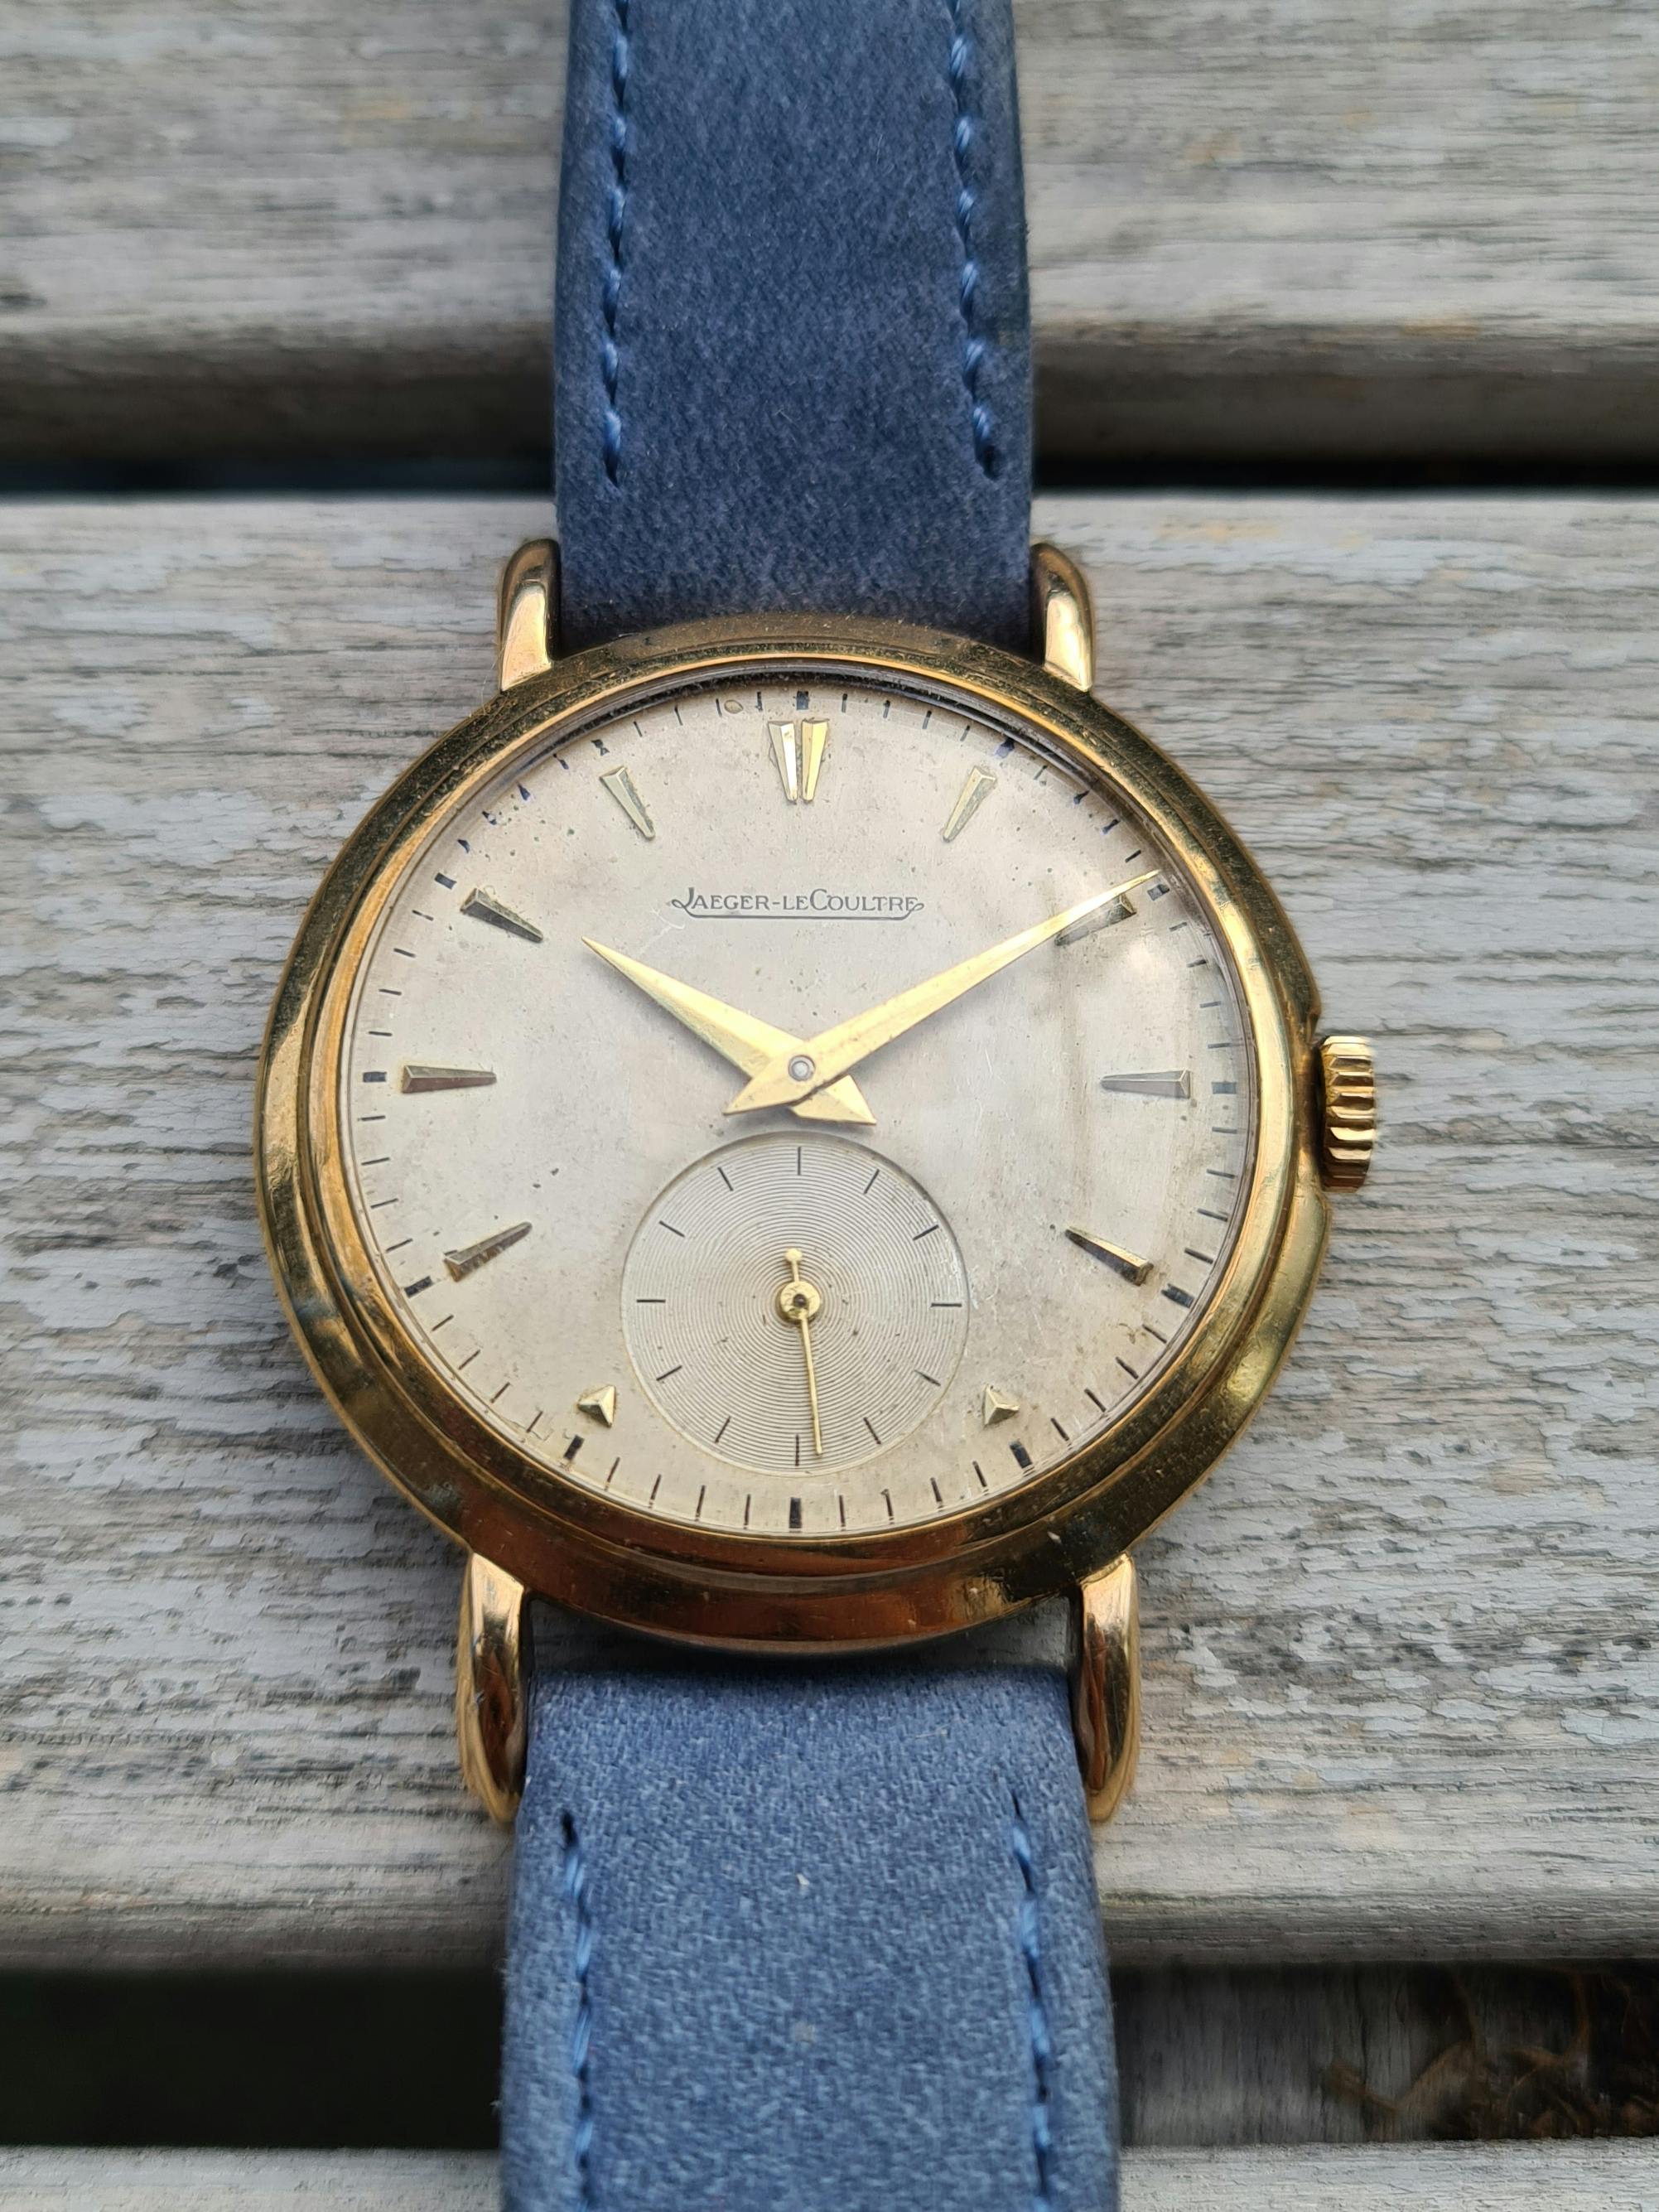 The second watch I purchased from eBay, a Gold Jaeger LeCoultre Time only dress watch from the 1950s.